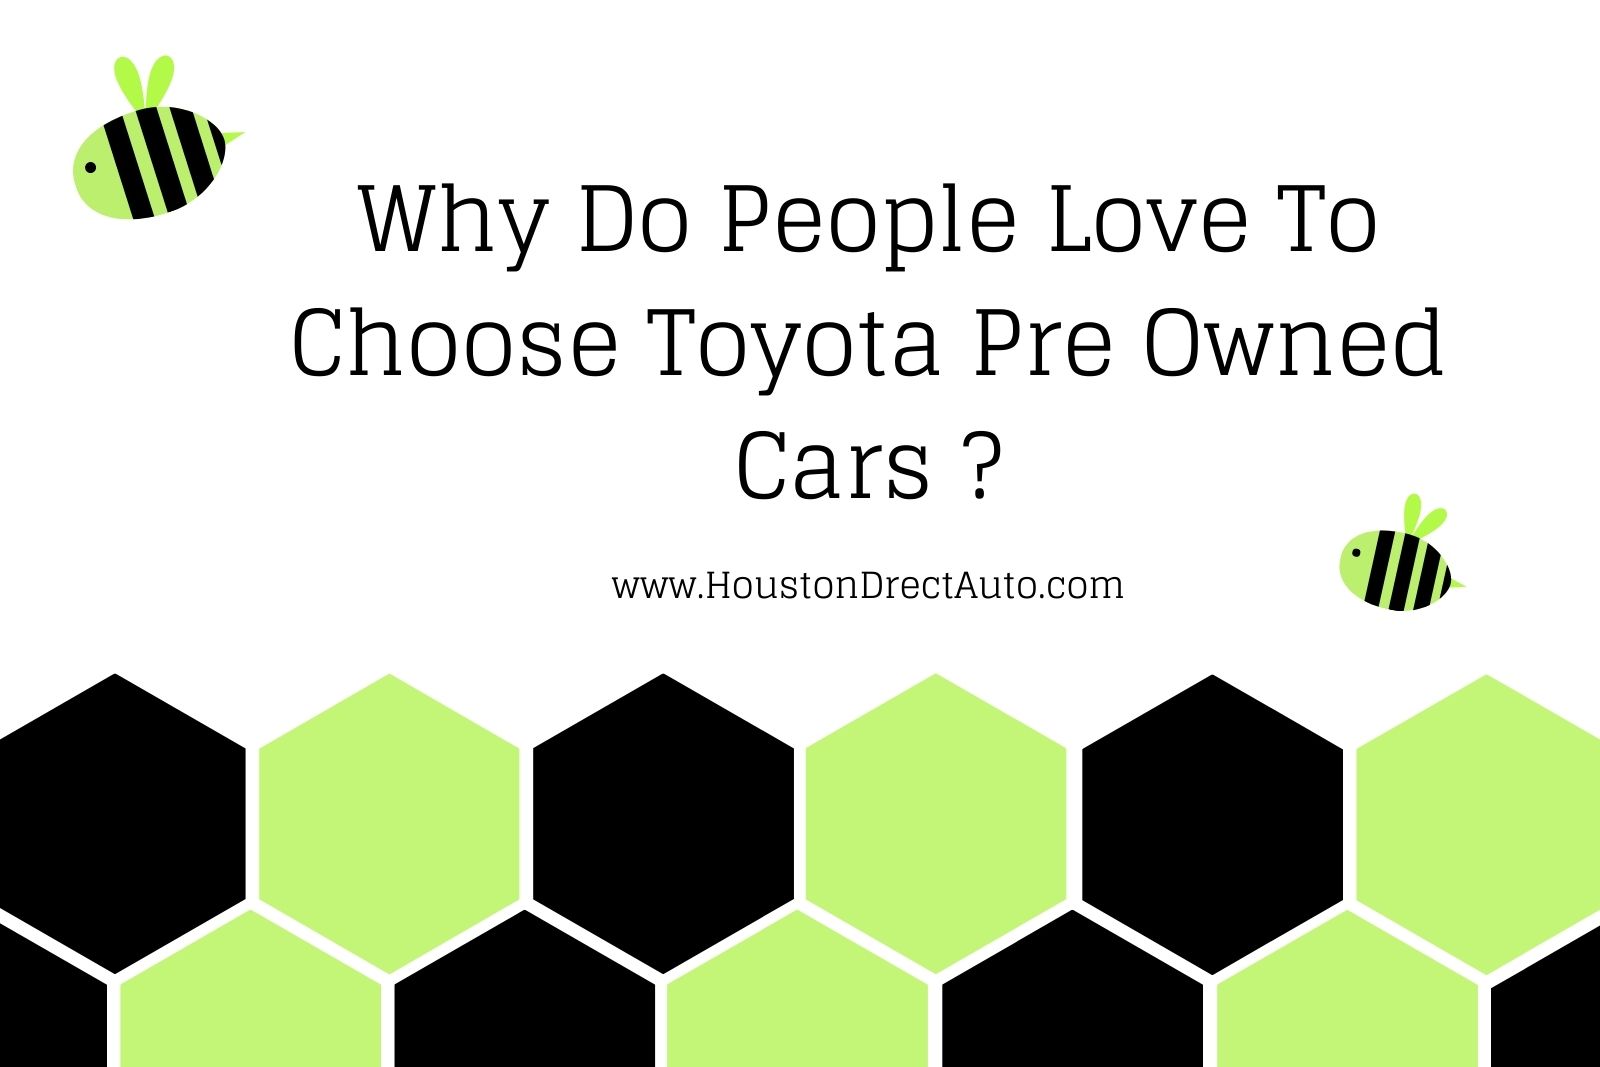 Why Do People Love To Choose Toyota Pre Owned Cars ?